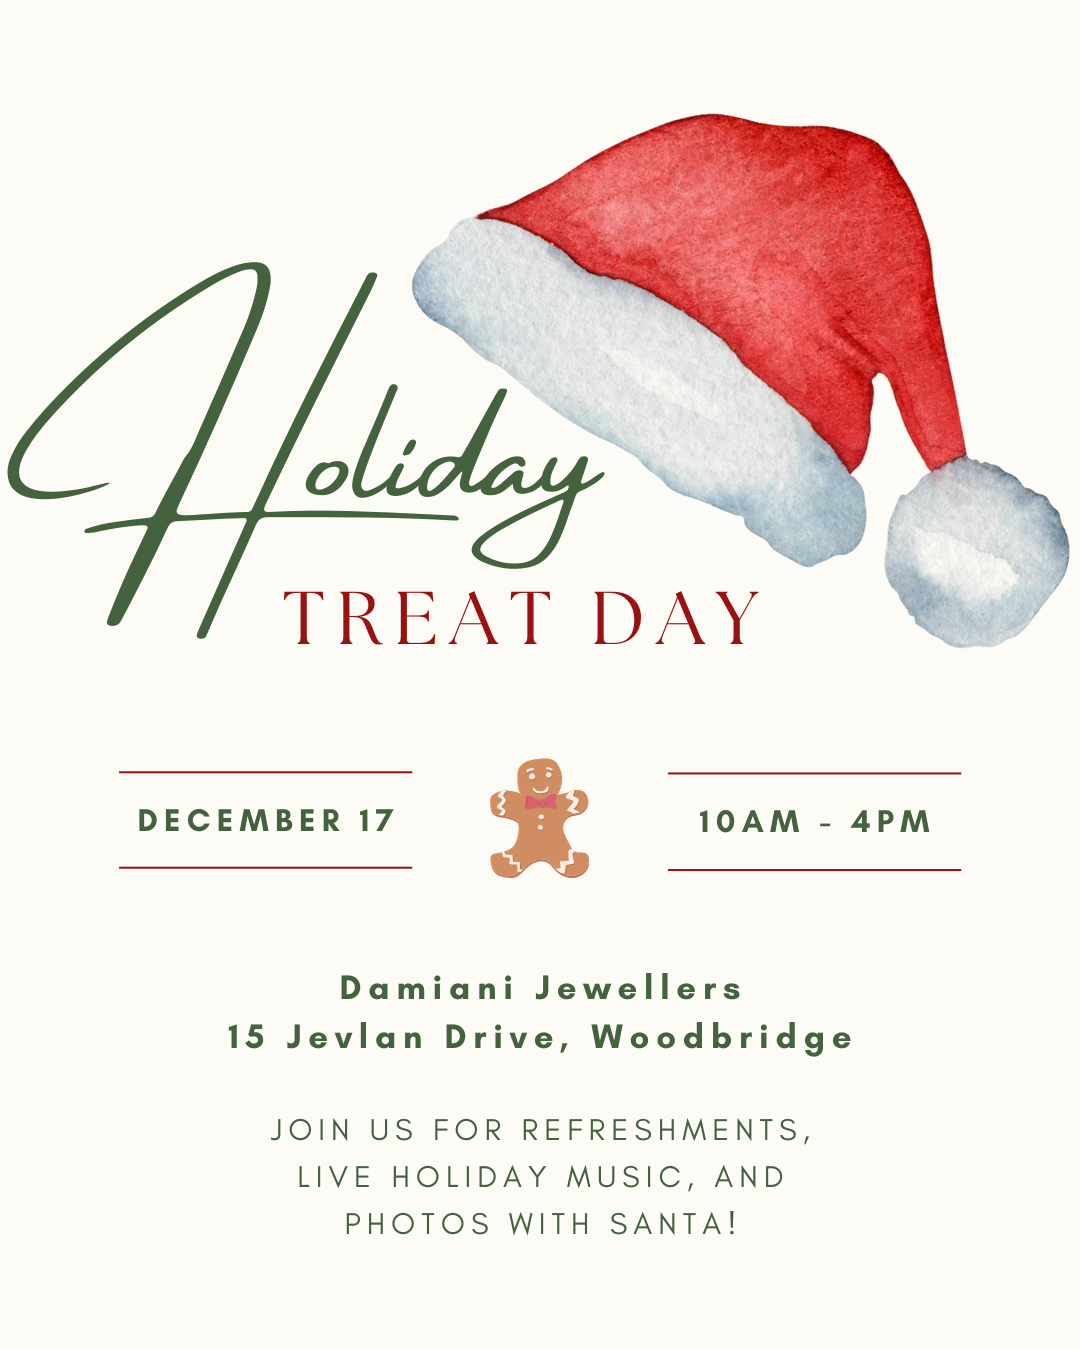 customer appreciation day at Damiani Jewellers - find last minute gifts for the holidays!